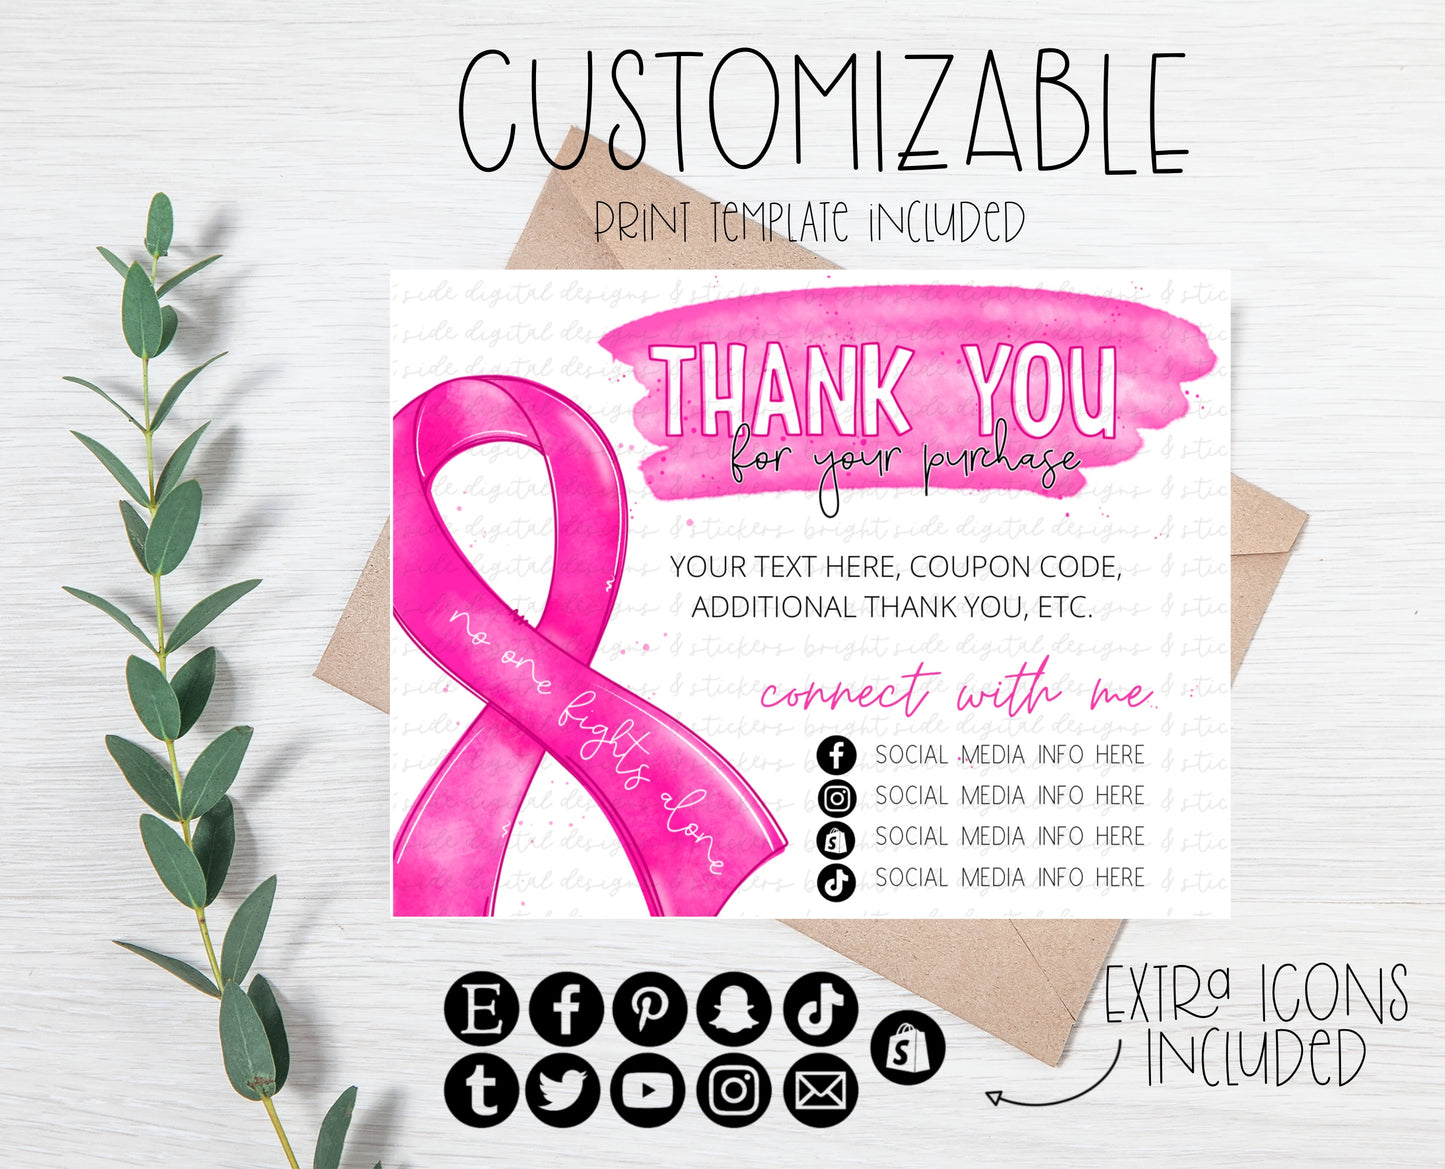 Breast Cancer Thank You Card